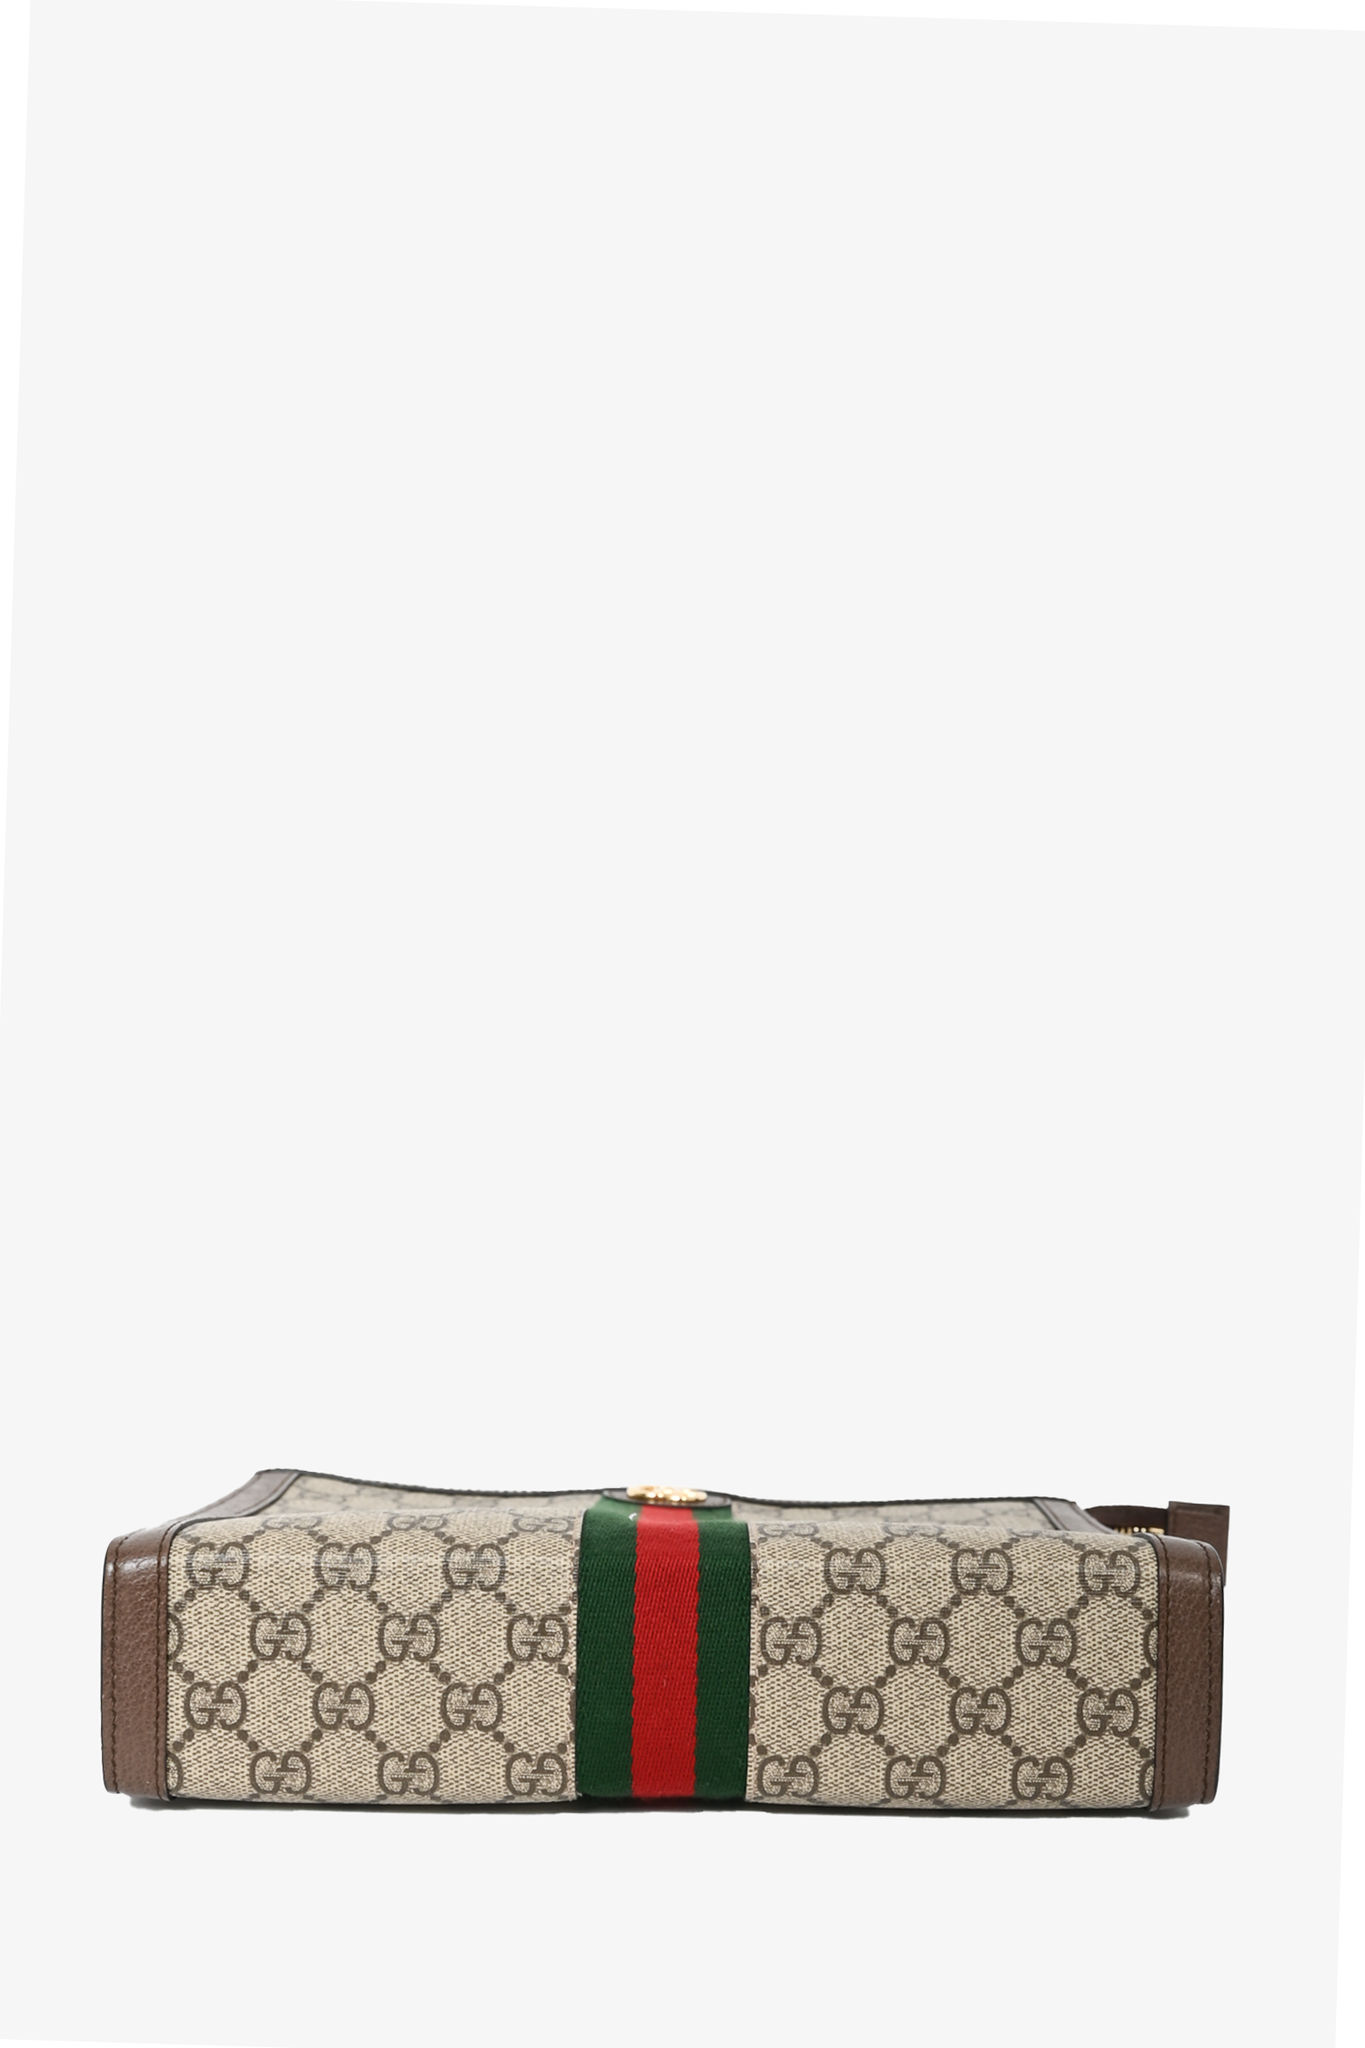 Gucci Brown Canvas Leather GG 'Ophidia' Clutch